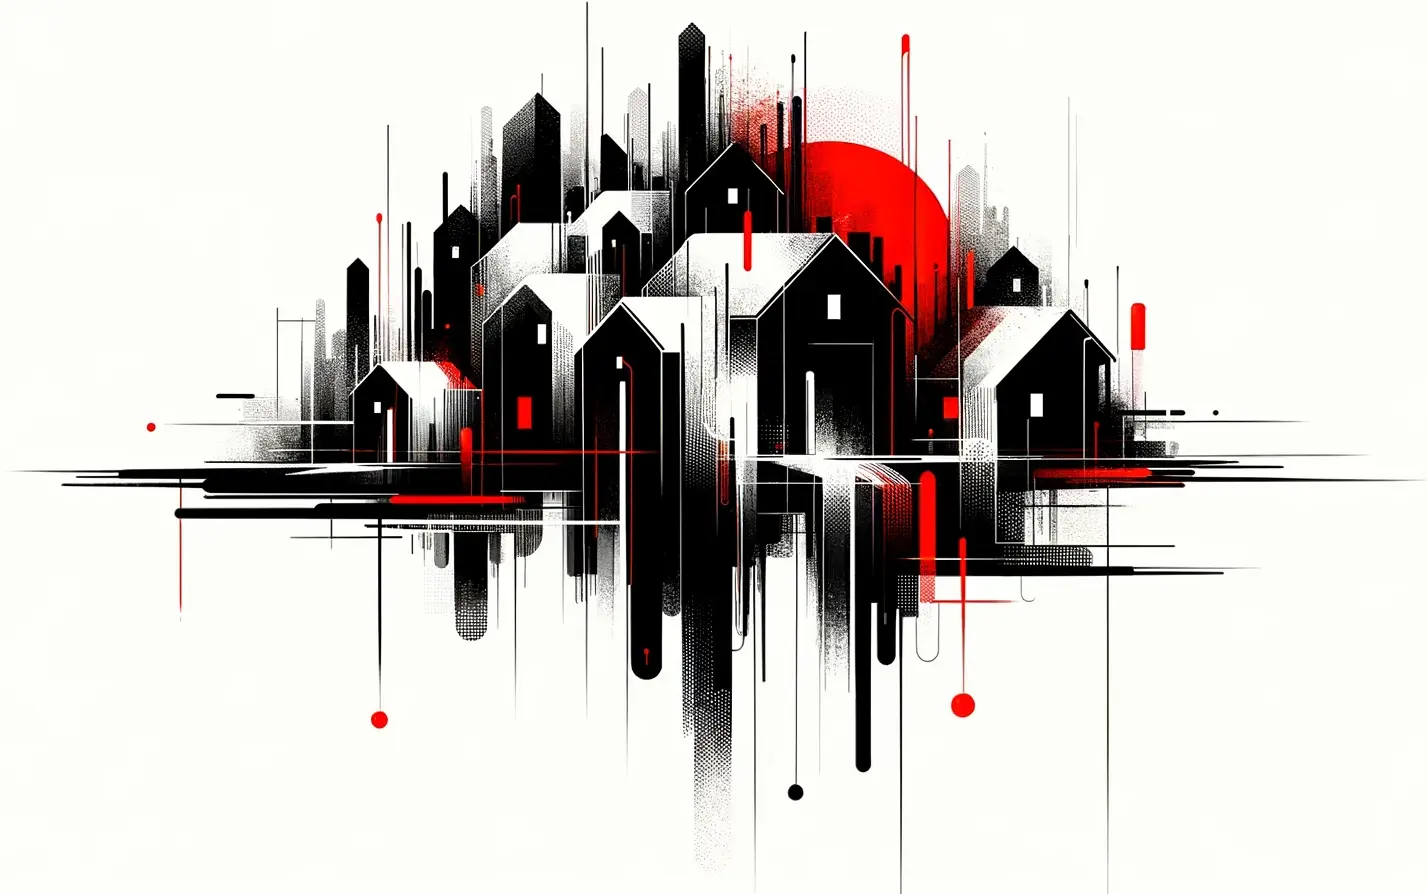 Stylized artistic representation of a housing market with a variety of abstract houses and buildings in a monochromatic scheme with red accents, symbolizing a diverse selection of homes for sale.